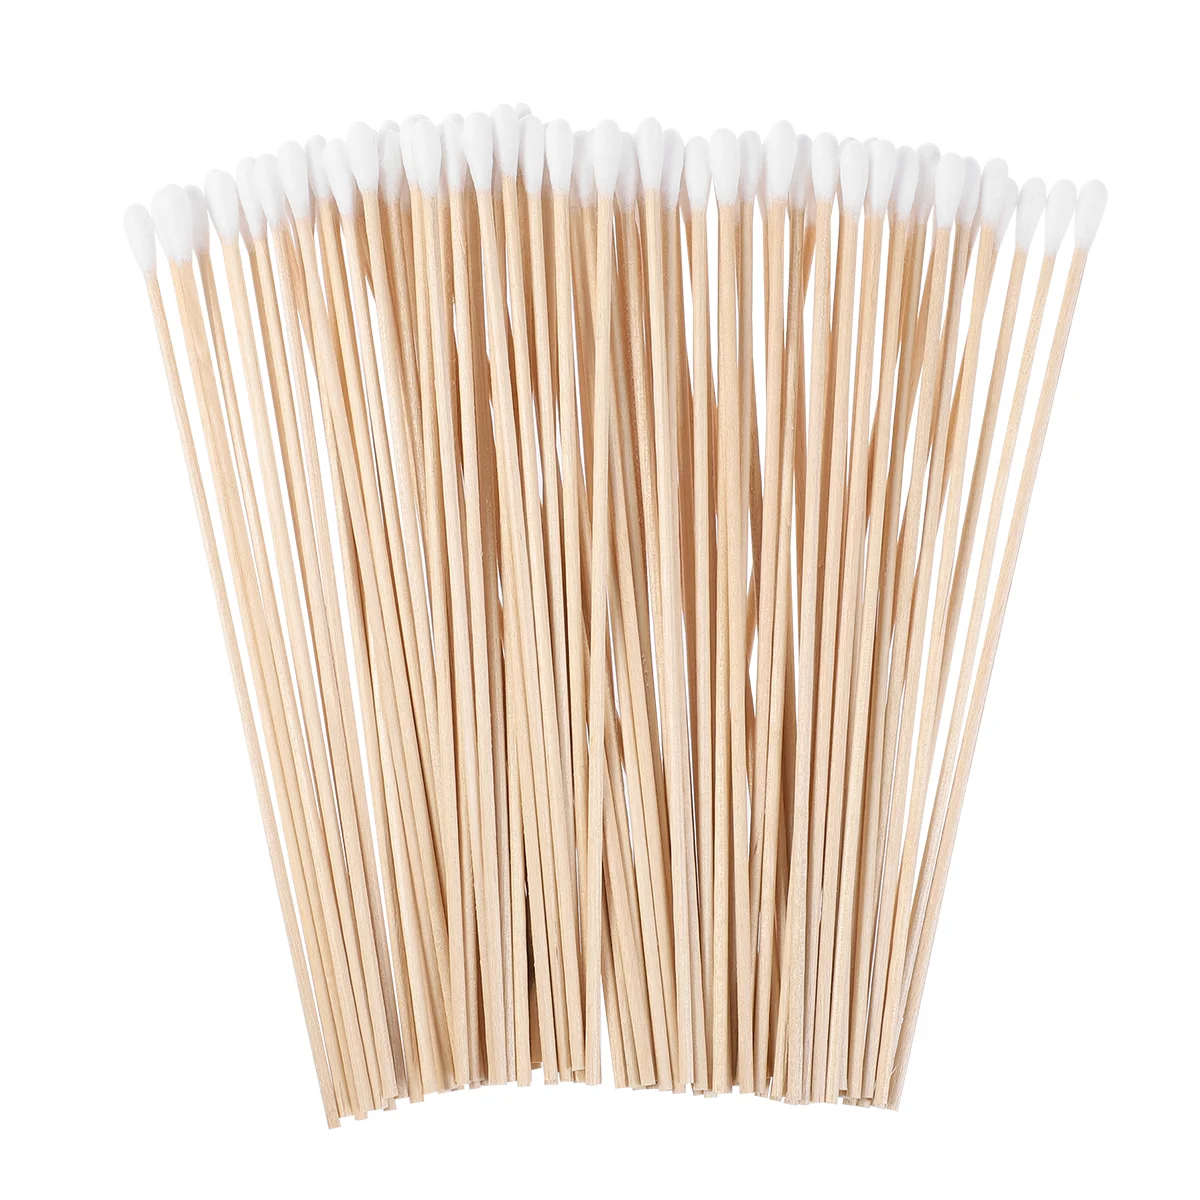 

Cotton Swabs Sticks Applicator Tip Swab Tool Makeup Handle Cleaning Ear Wood Pointed Tipped Wooden Swad